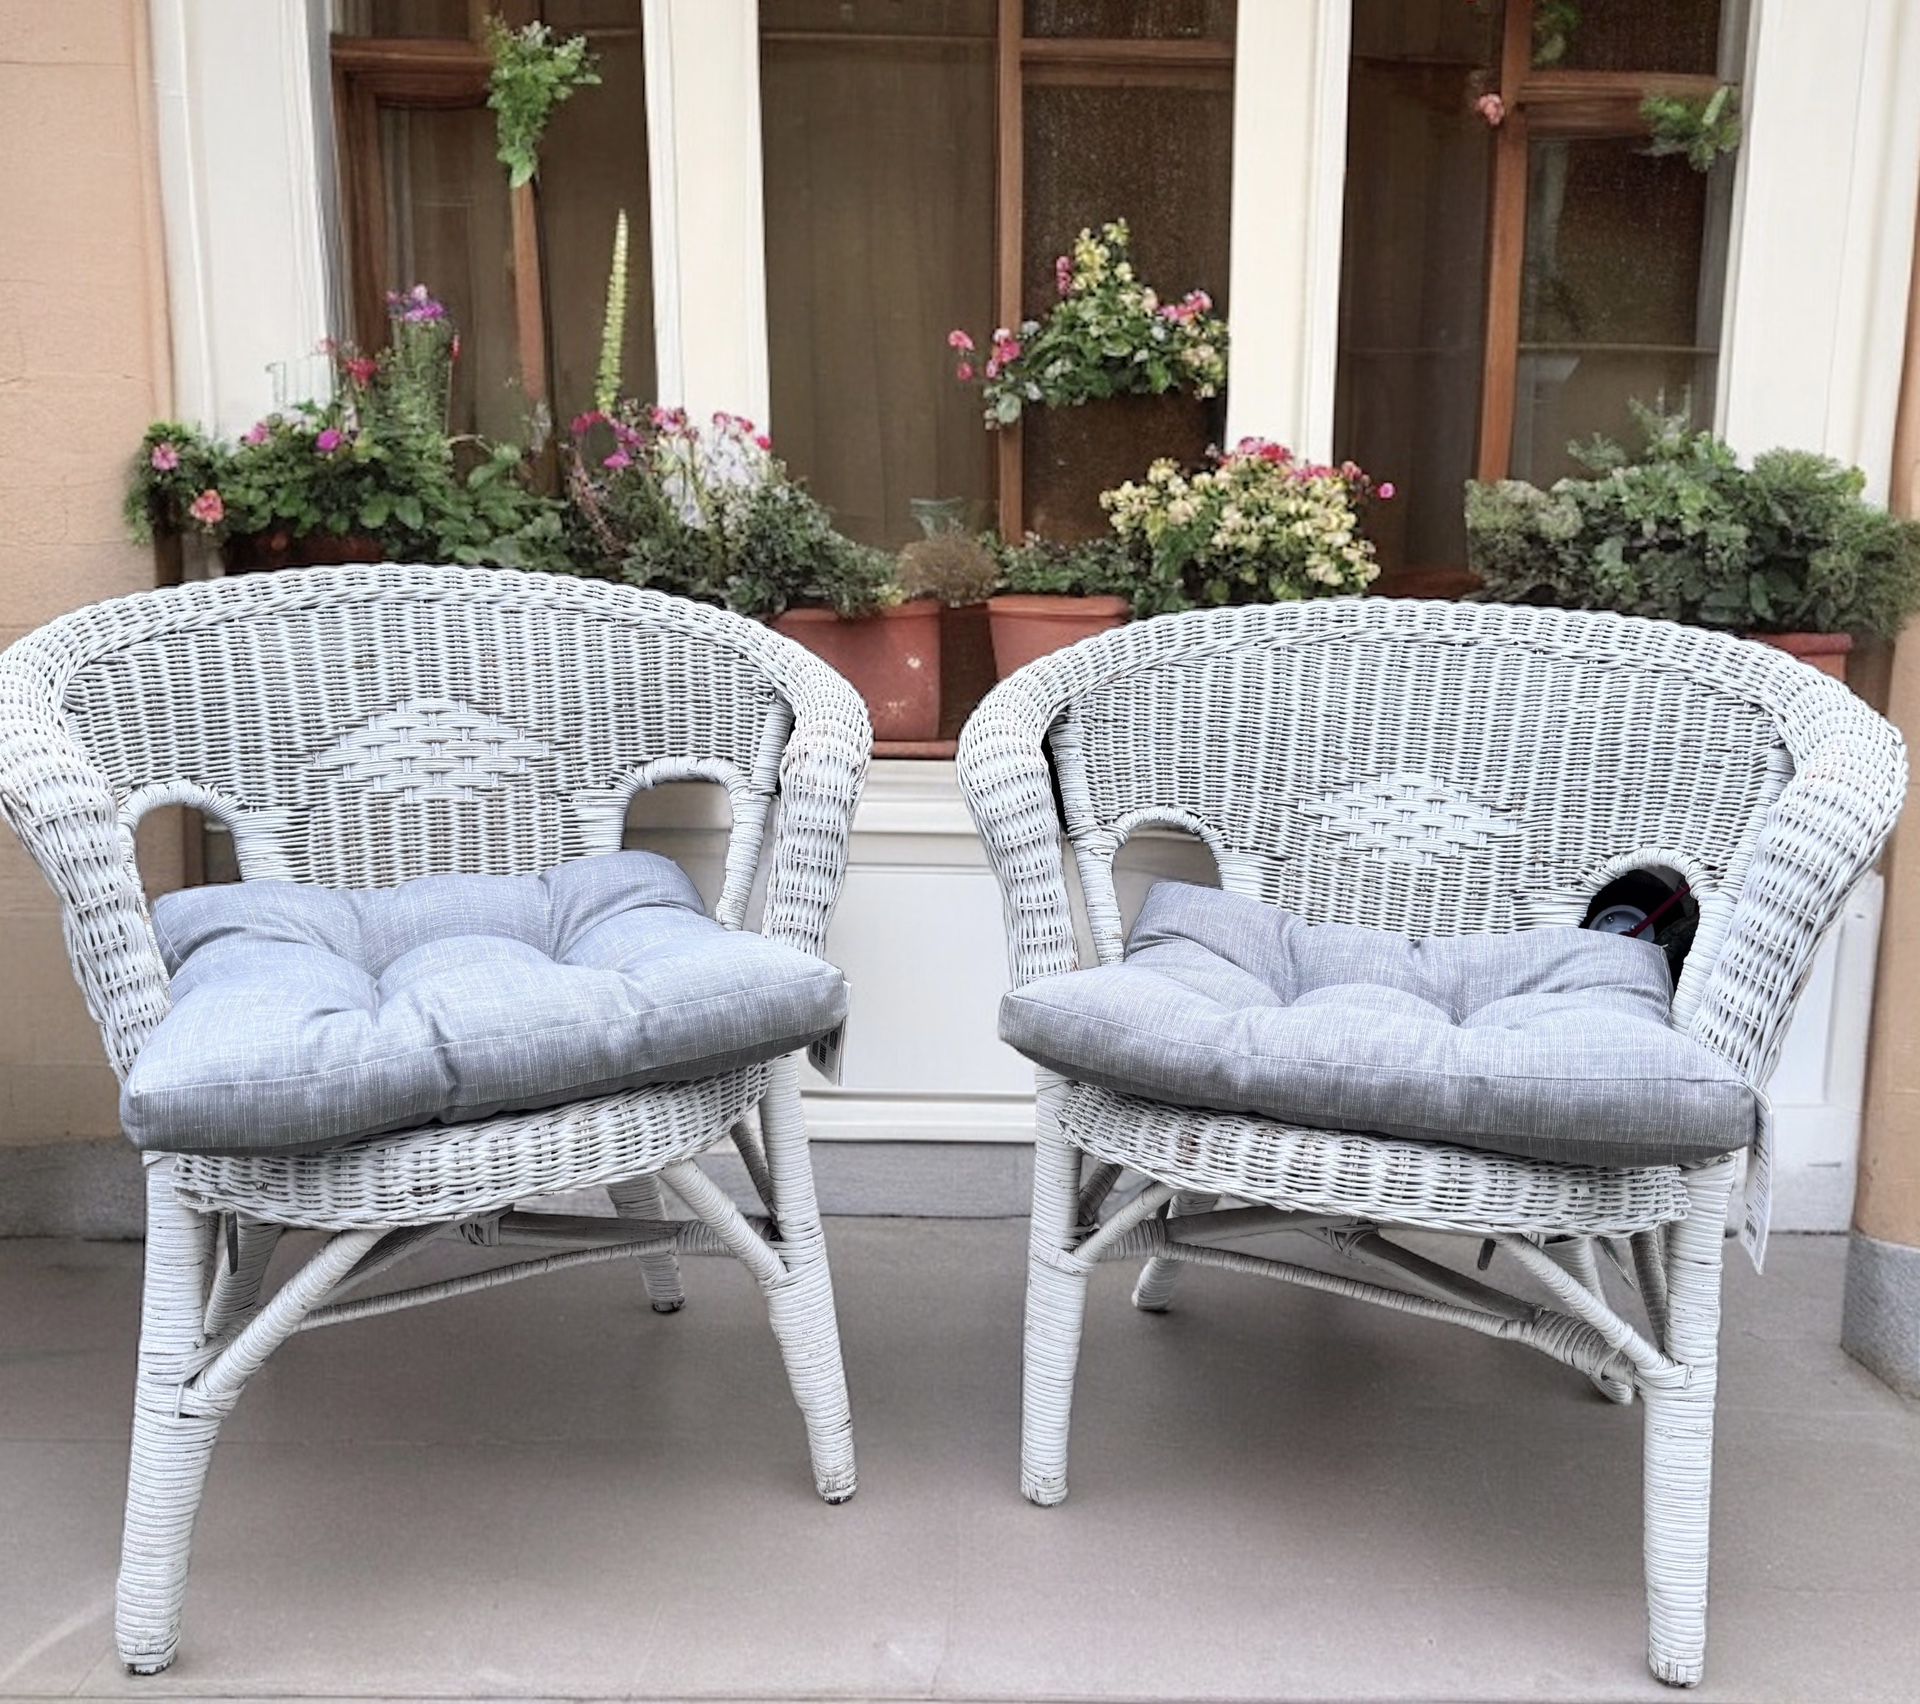 Antique Wicker Chairs With New Seat Cushions